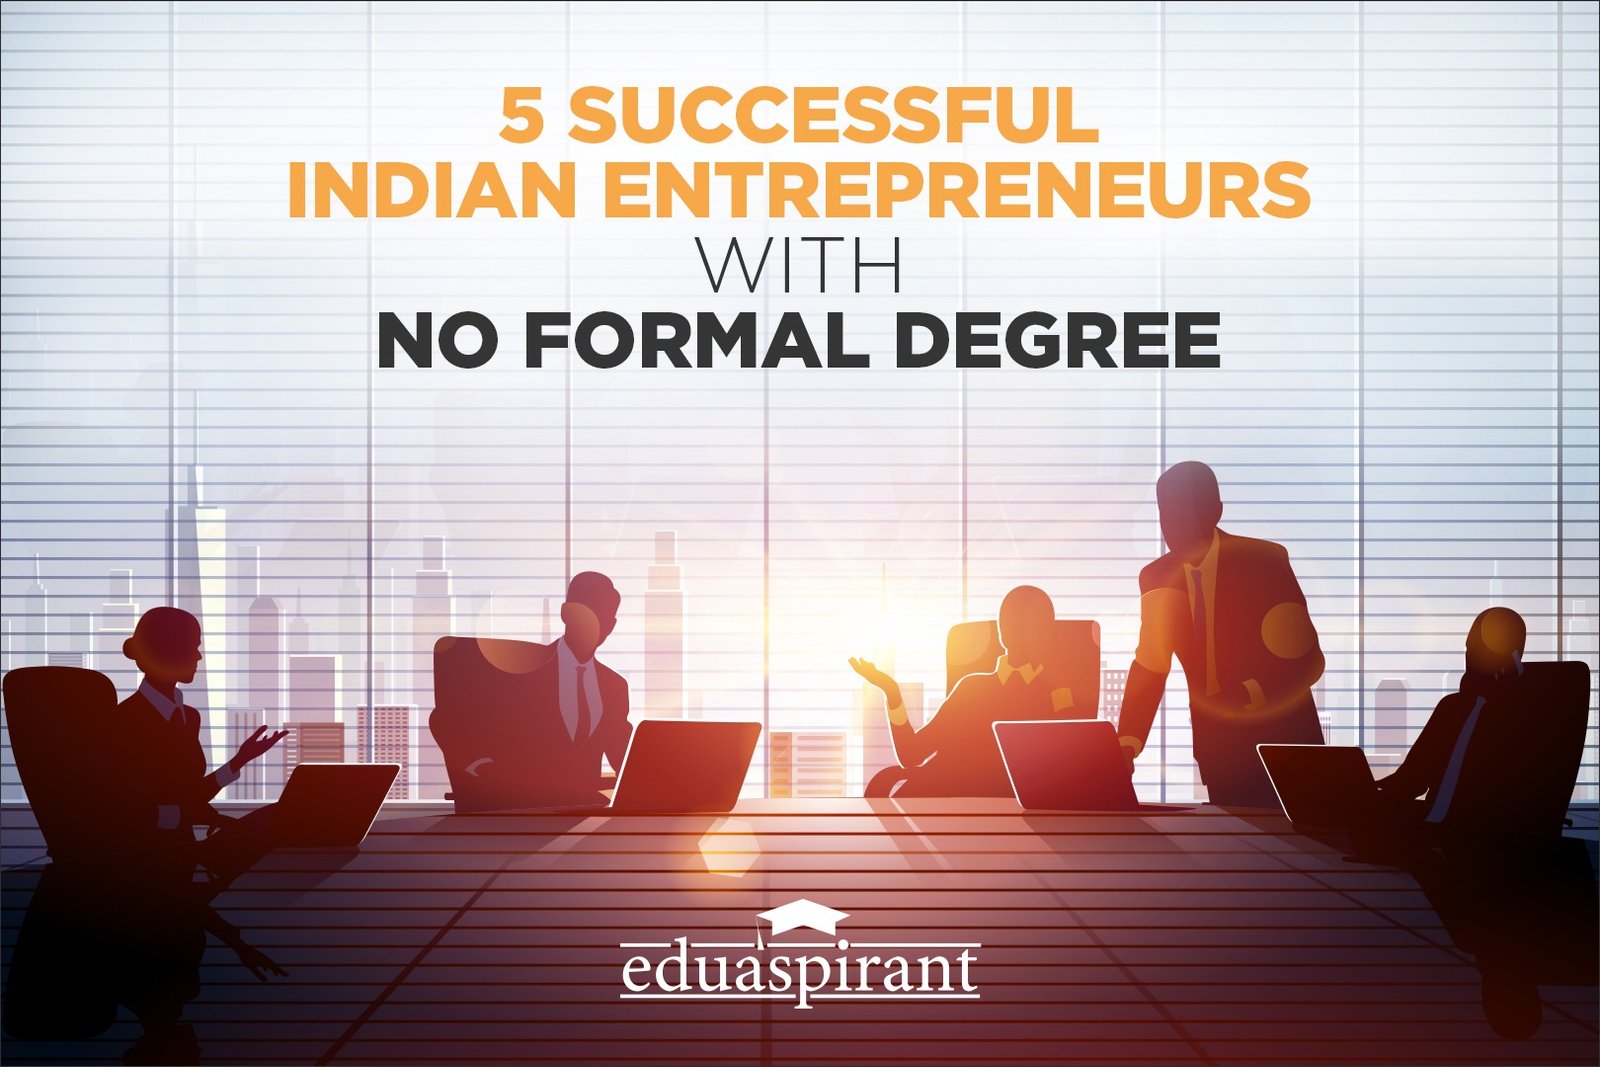 5 Successful Indian Entrepreneurs who have made it big without a degree